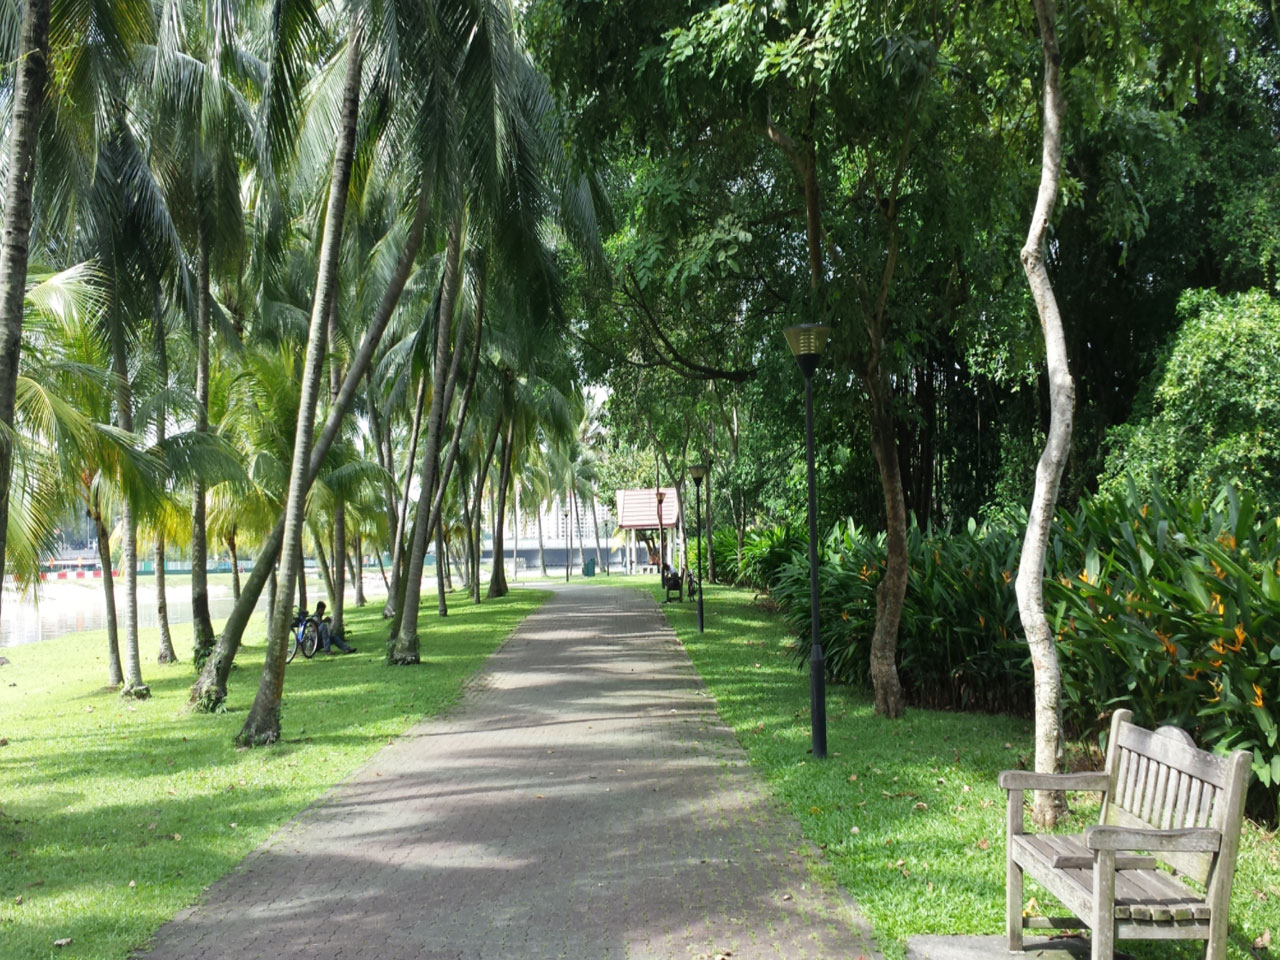 About 6 minutes from Mori to Kallang Riverside Park